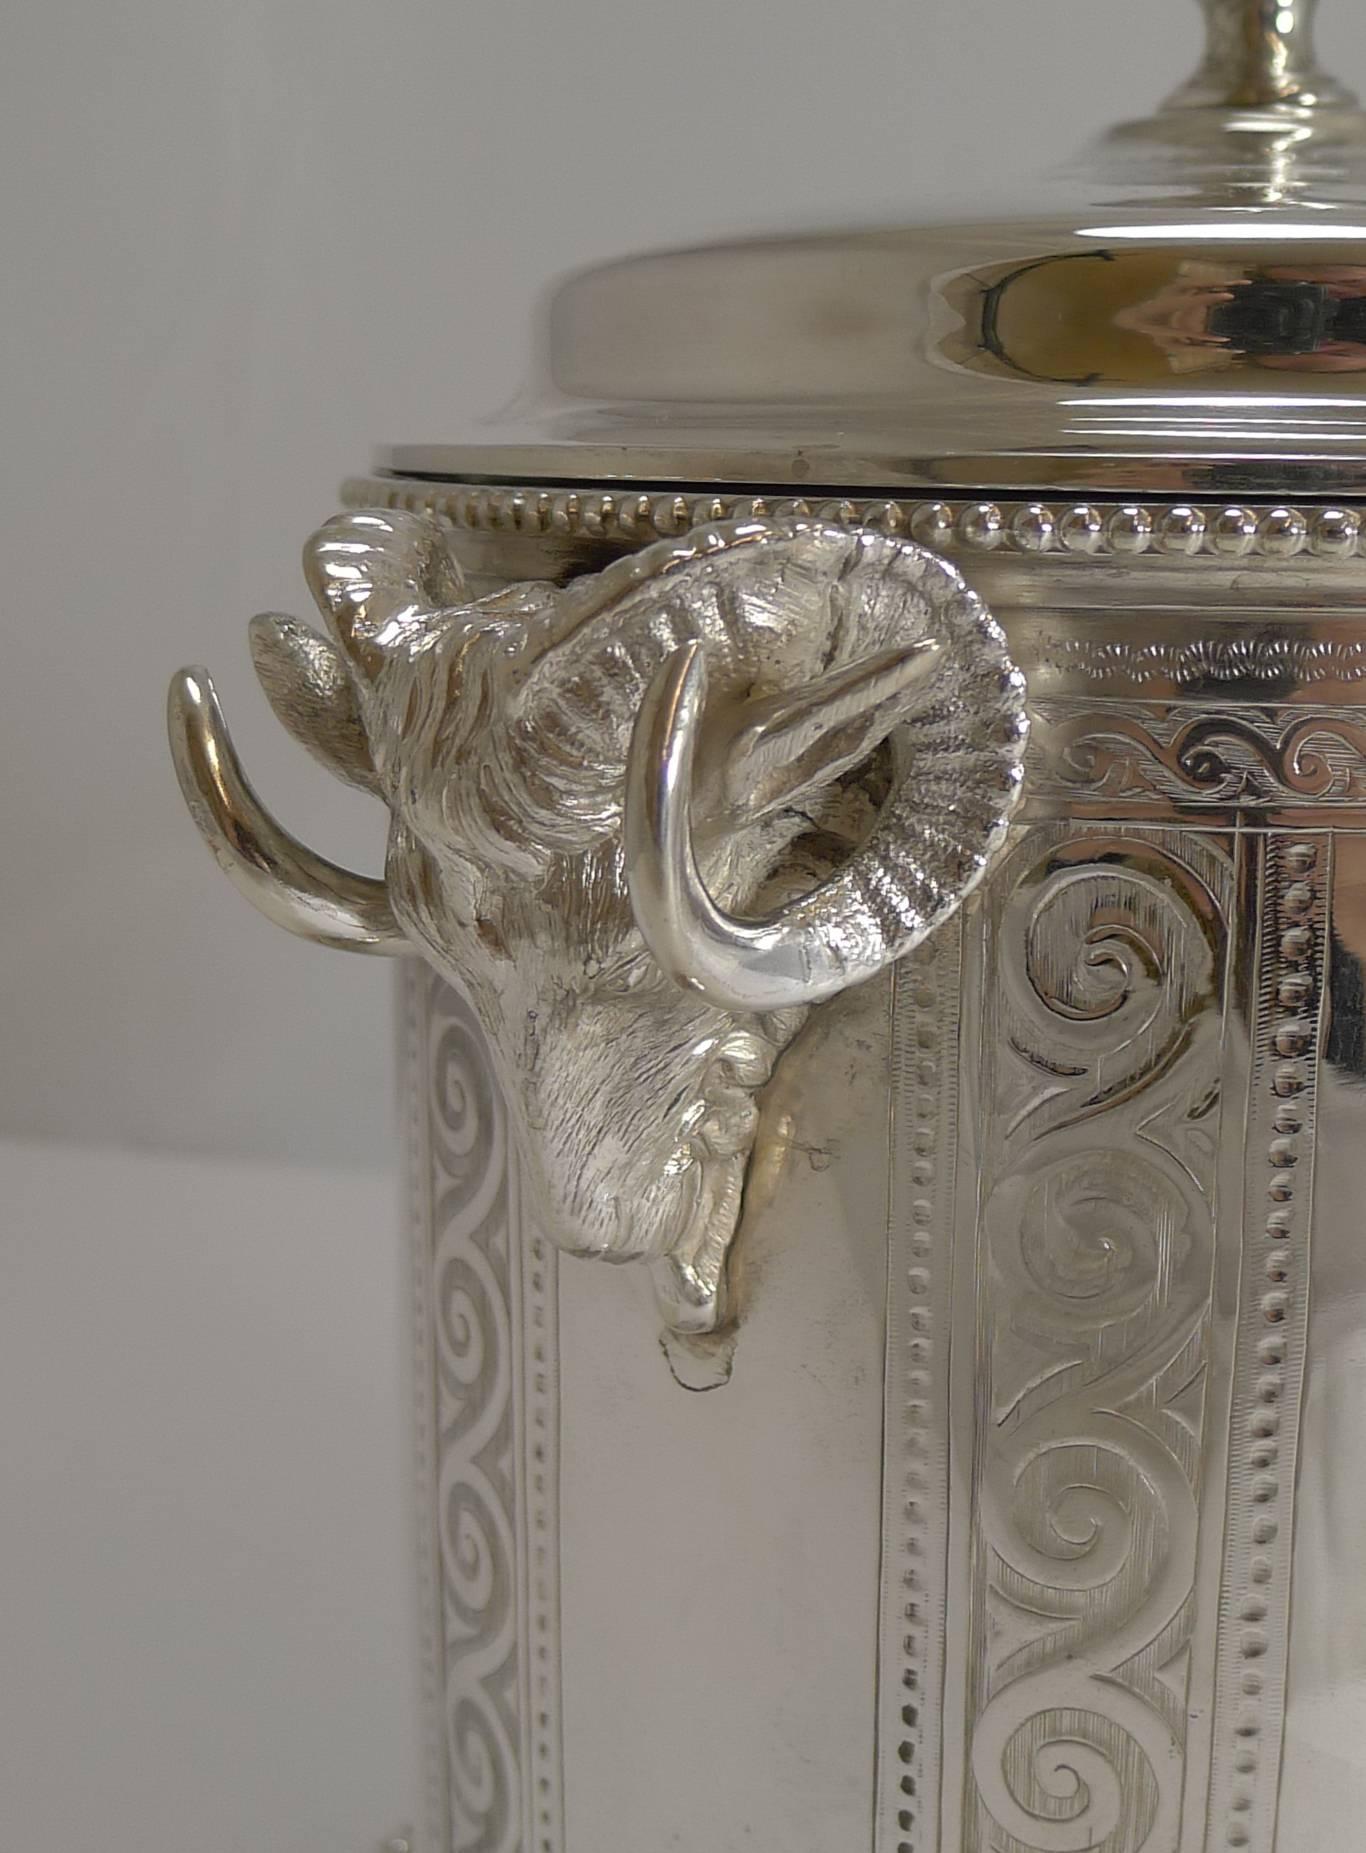 A wonderful and most unusual biscuit box (a perfect ice bucket too), made from English silver plate by William Briggs and Co. of Sheffield.

The body and hinged lid are intricately engraved and either side is mounted with a cast Ram's head handle,